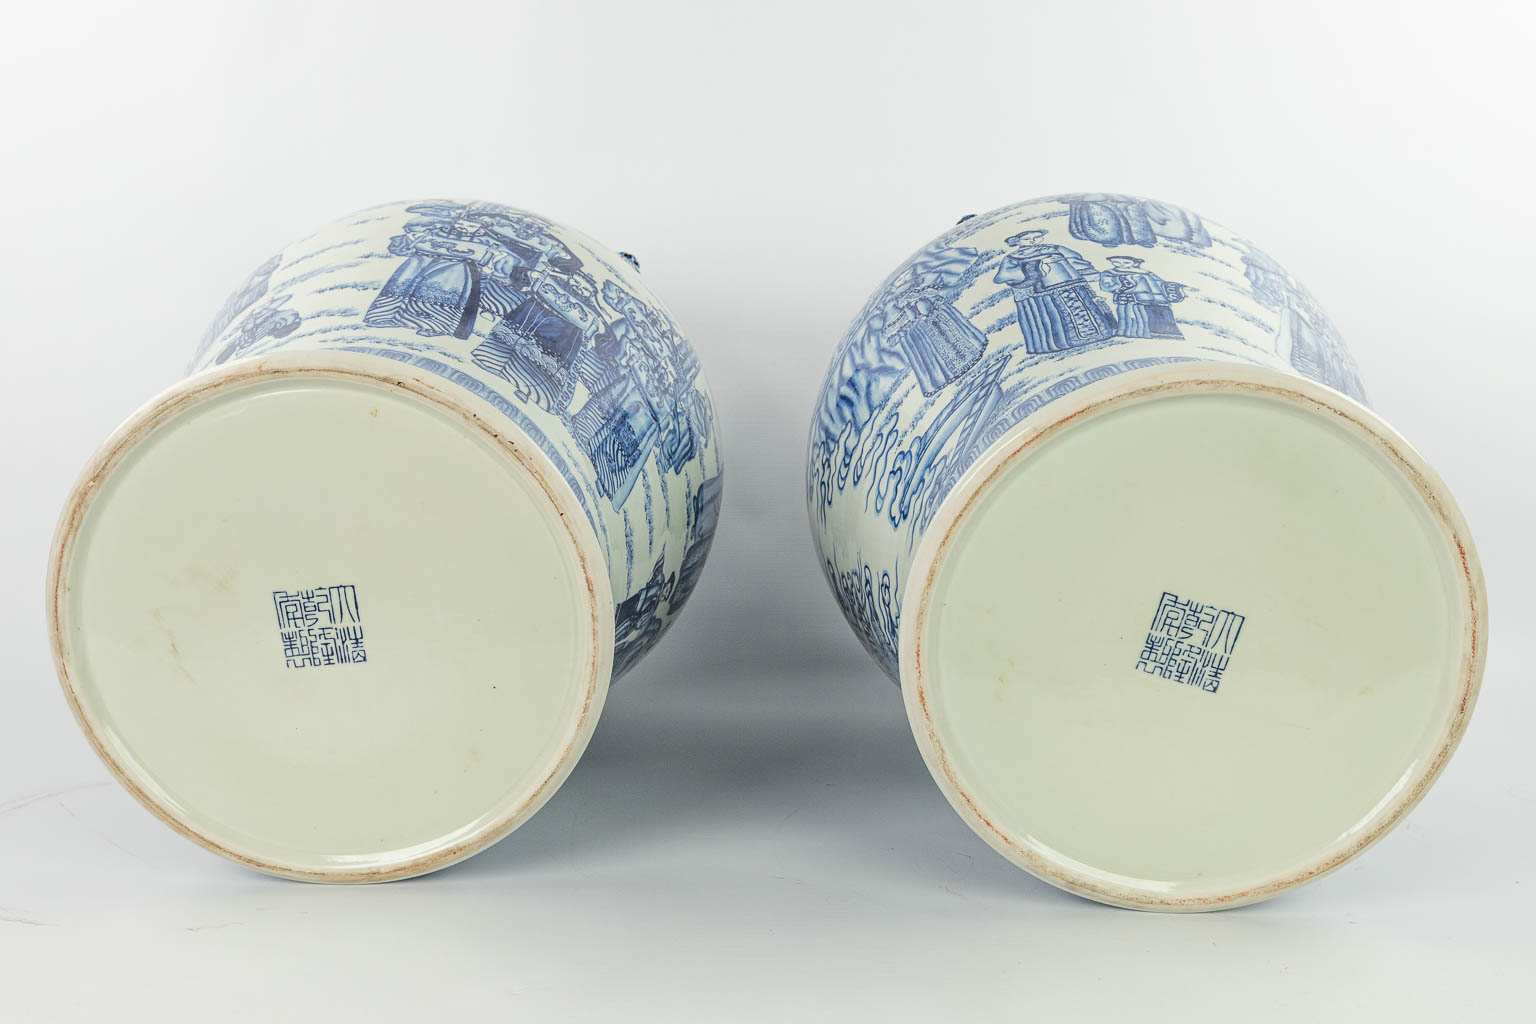 A pair of large Chinese vases with lid, made of blue-white porcelain with the emperor, dragons and with foo dogs. (H:83cm)